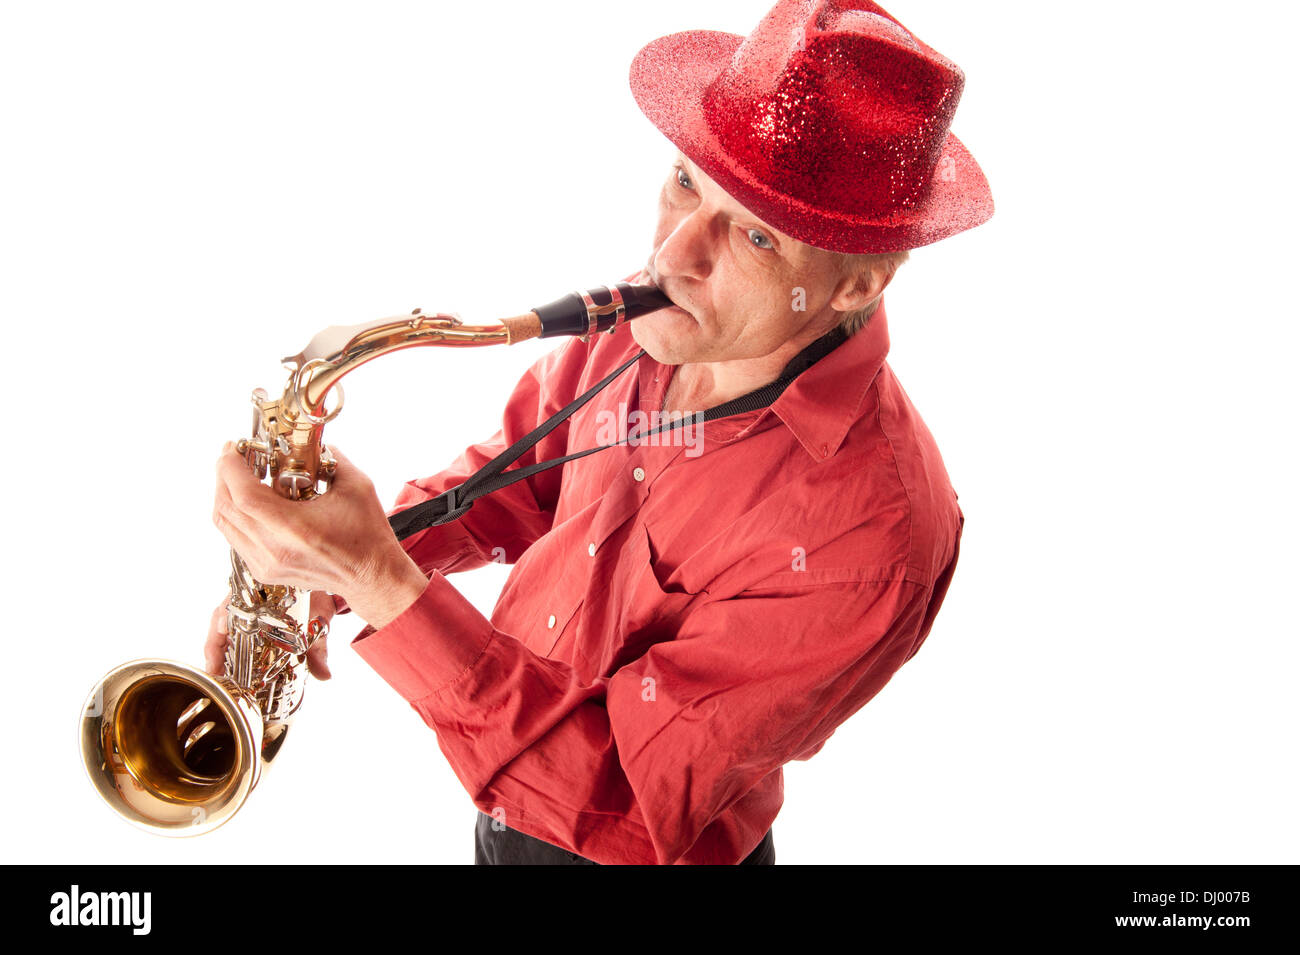 Male musician with hat playing a brass tenor saxophone from above Stock Photo